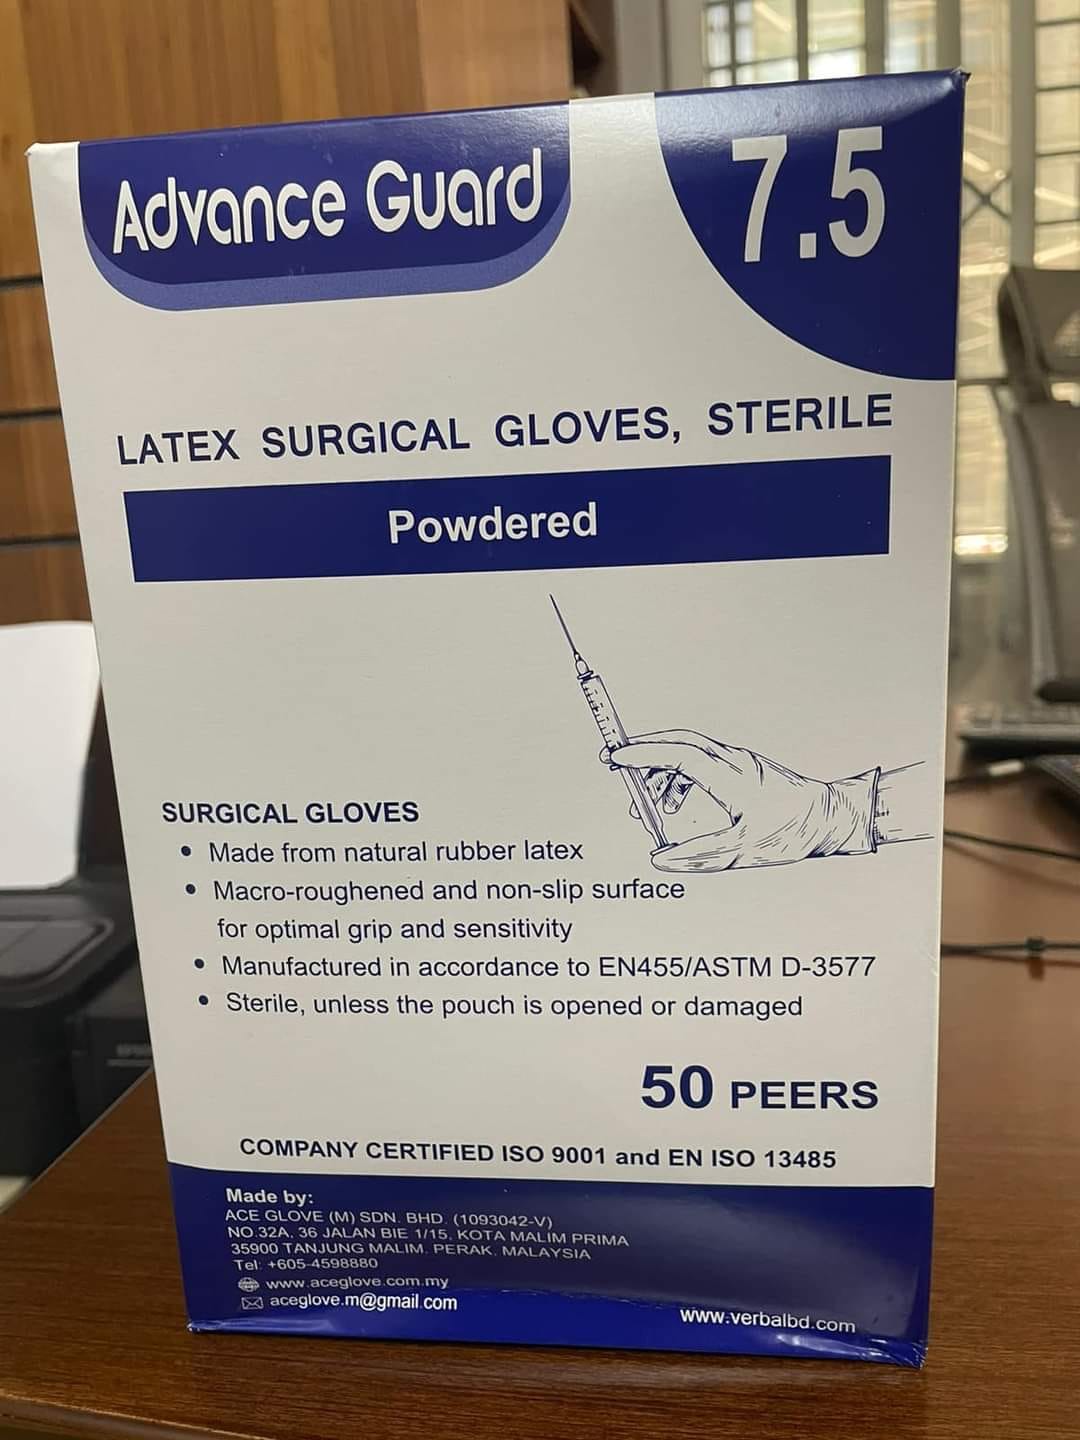 Advance Guard Latex Surgical Gloves Sterile Powdered